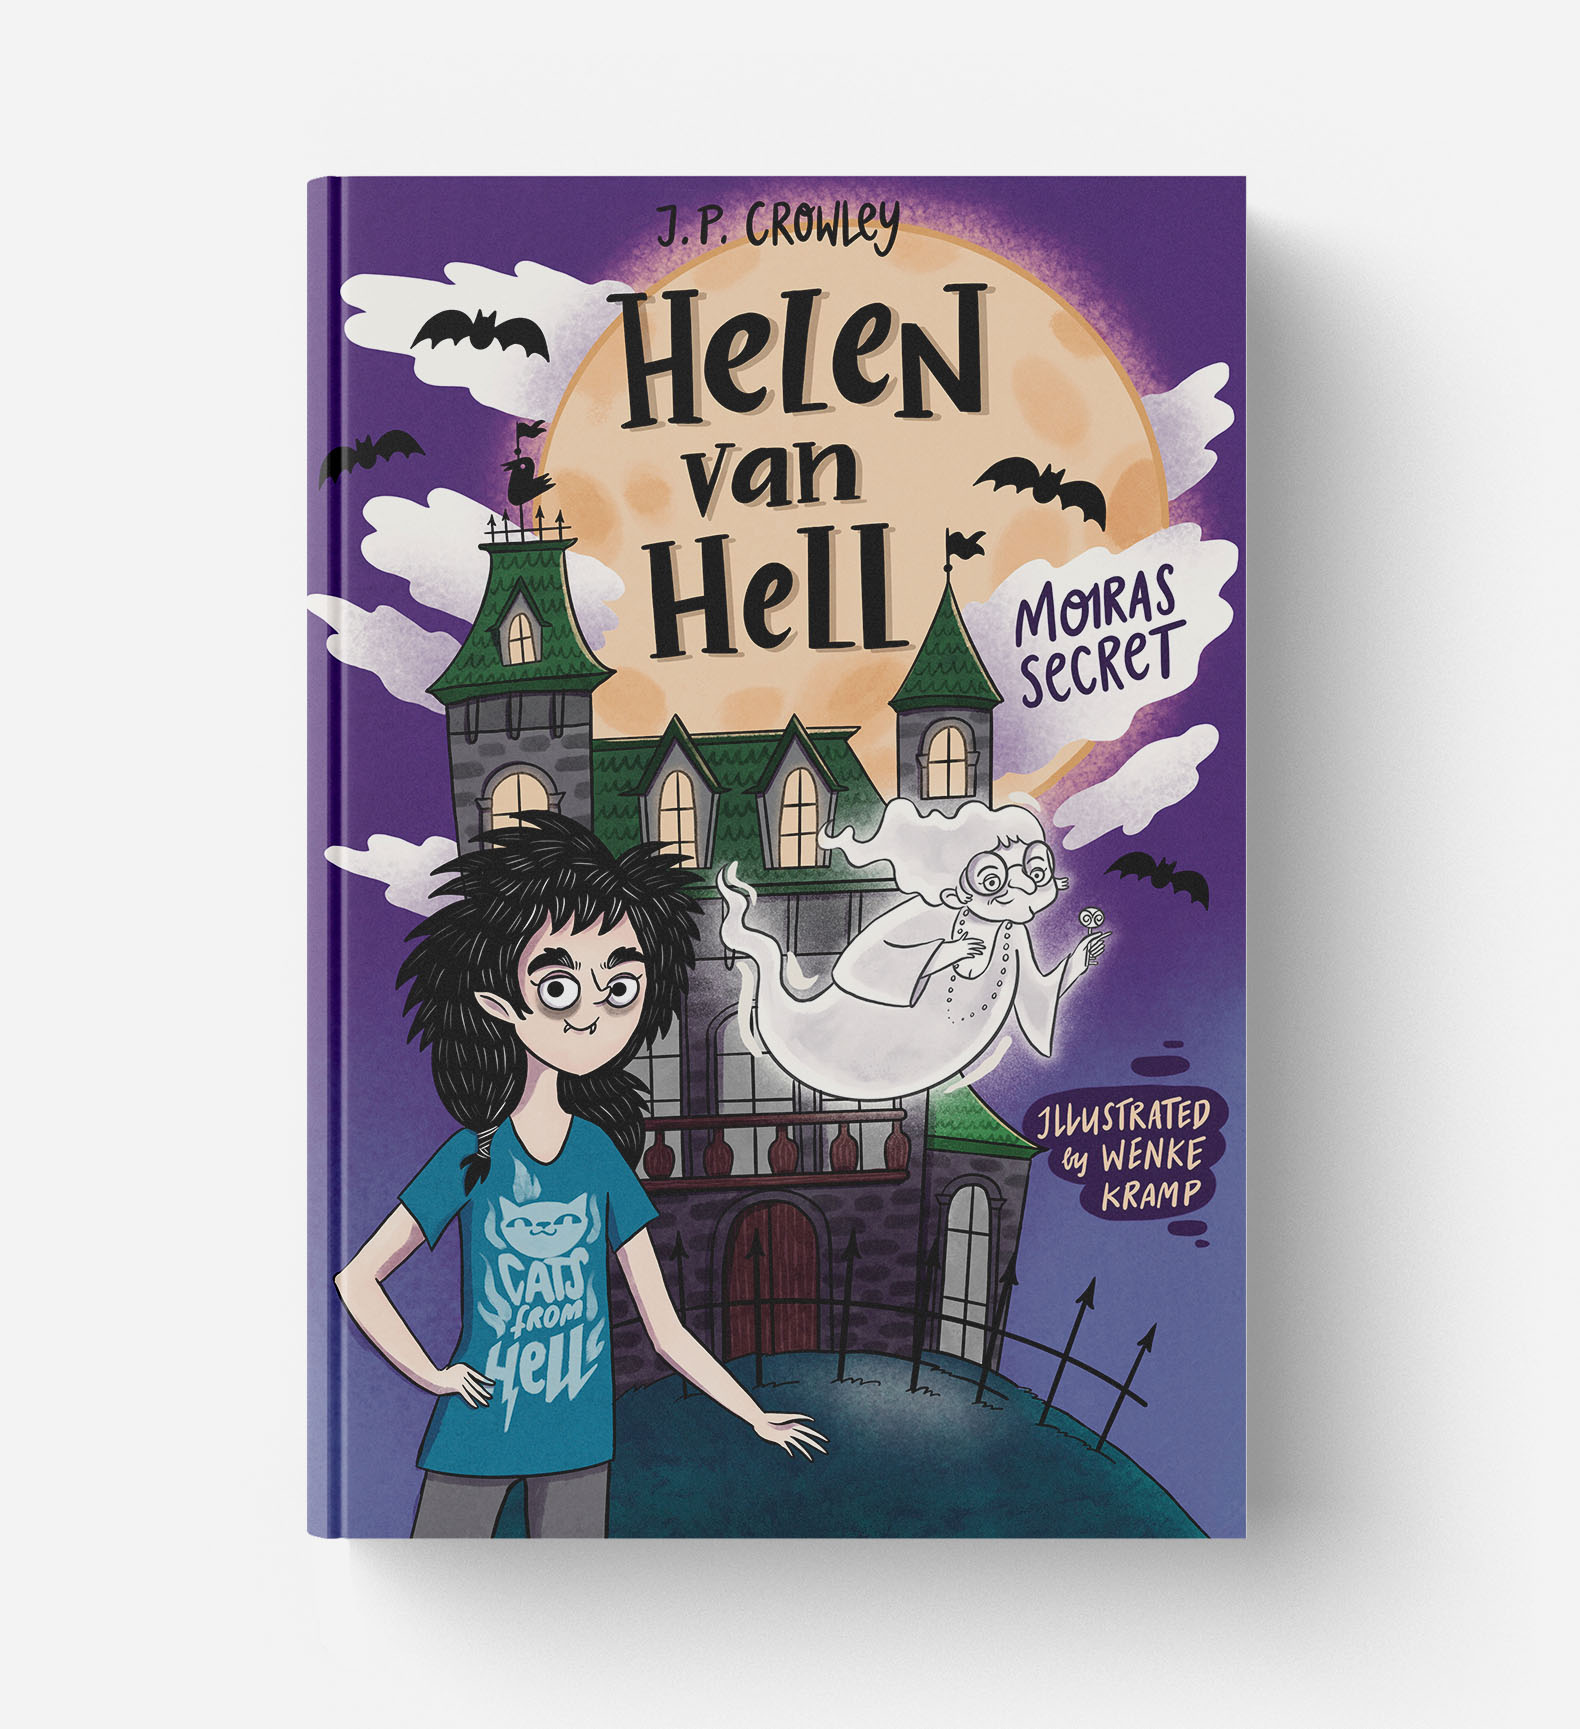 cover of a childrensbookof an vampiregirl. she is standing in front of a huge old mansion.